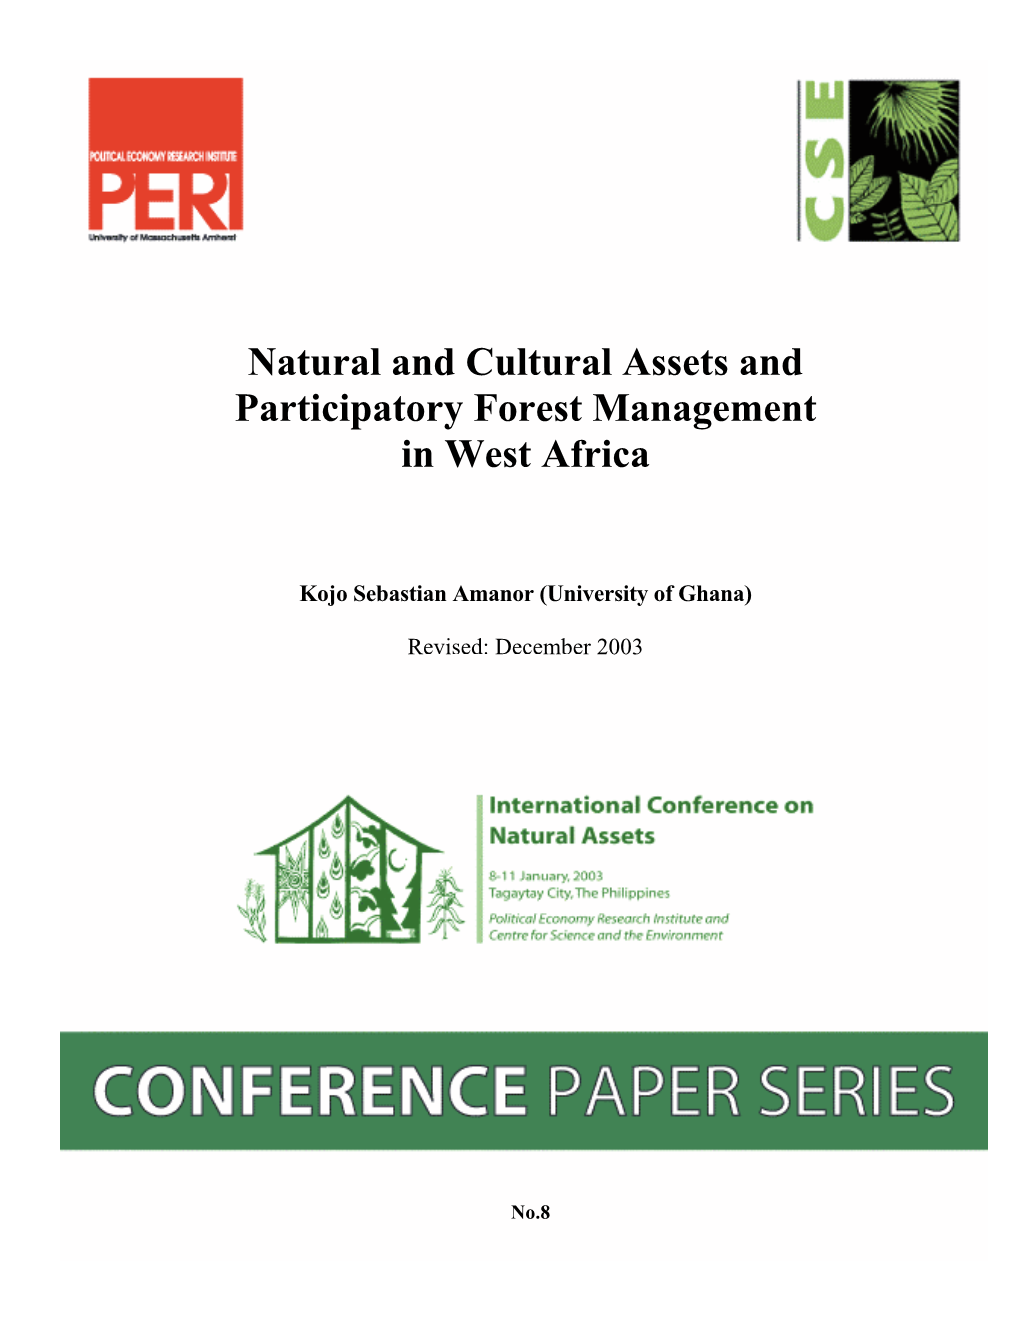 Natural and Cultural Assets and Participatory Forest Management in West Africa